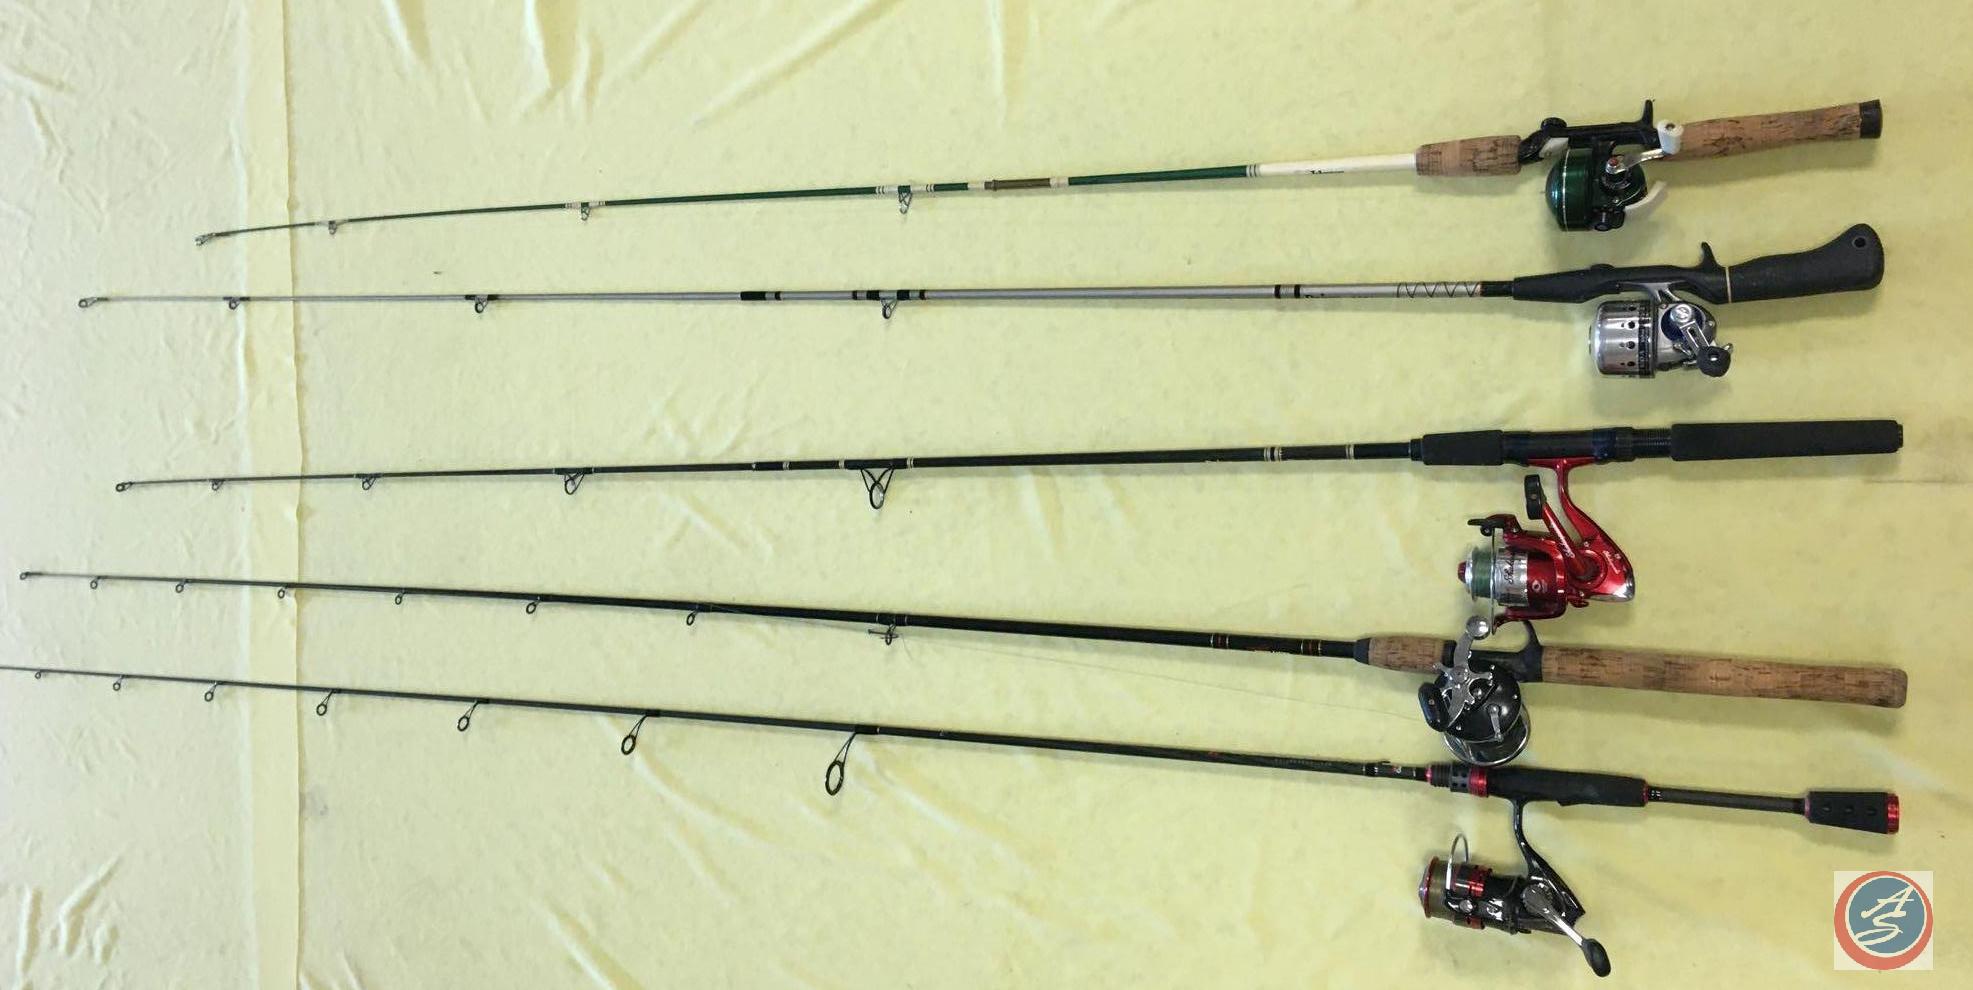 5) Rod and Reel Combos: Abu Garcia Orra S30 on